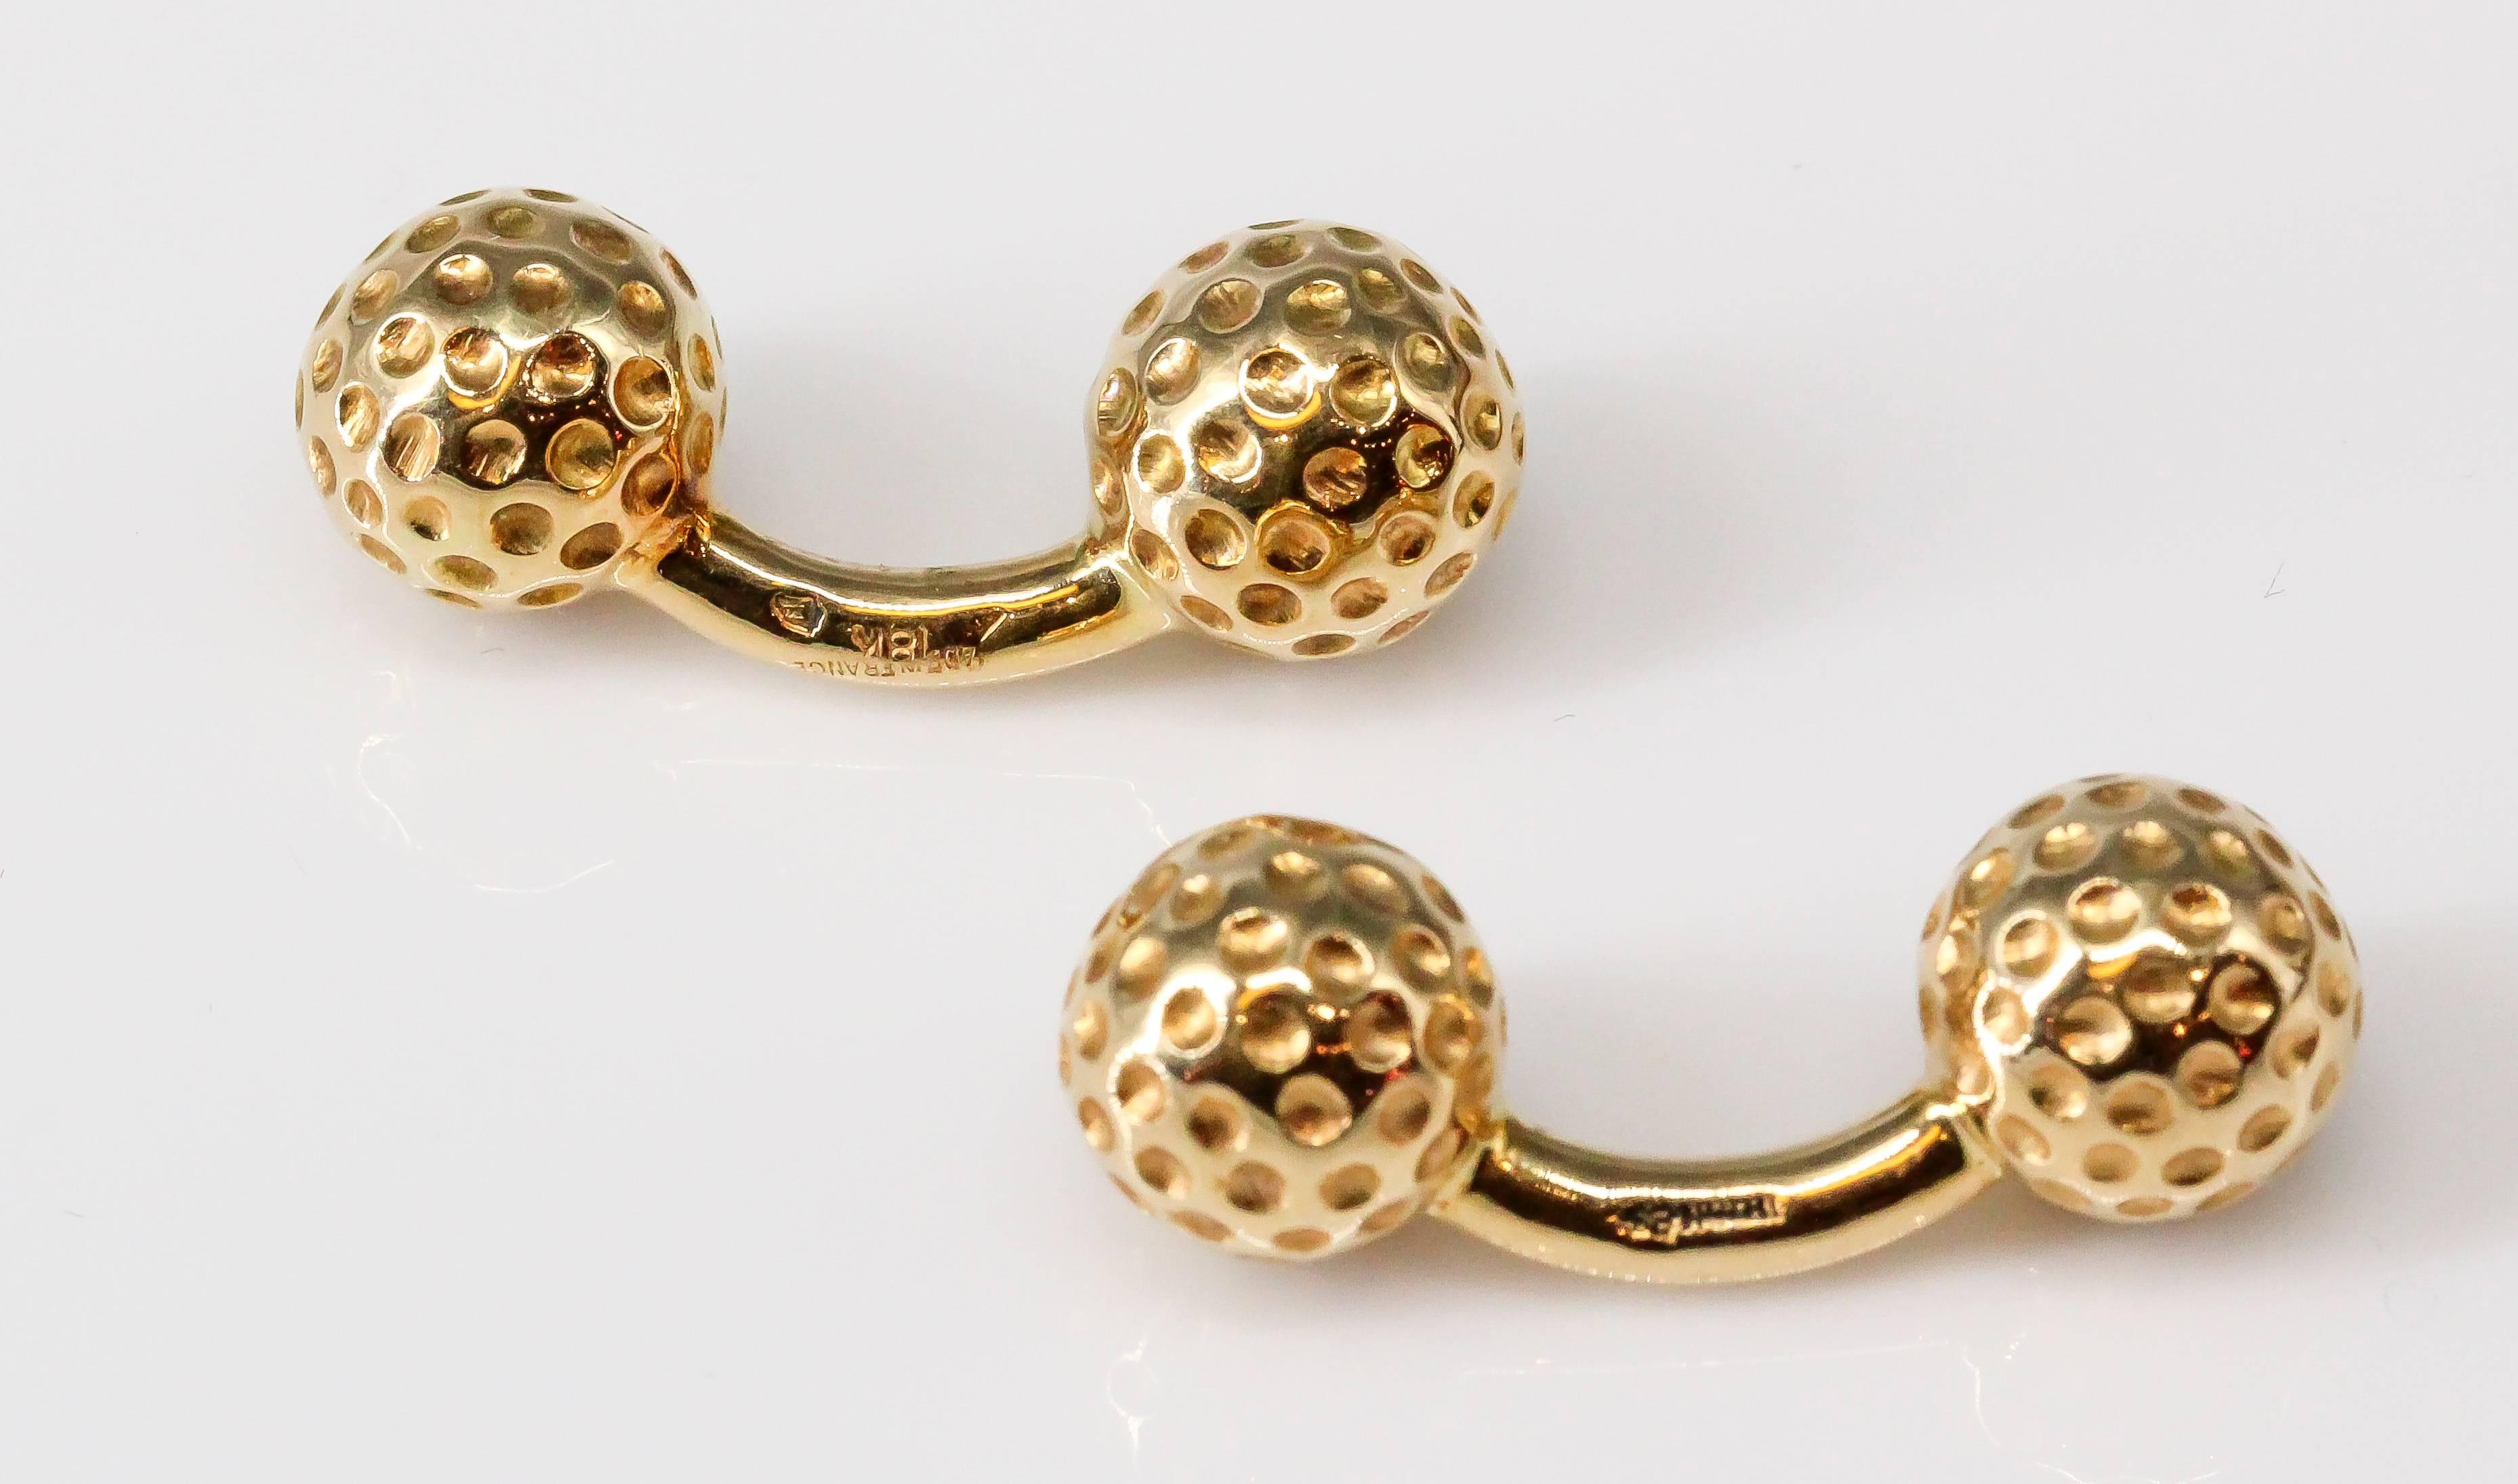 Handsome 18K yellow gold dumbbell cufflinks in the likeness of golf balls, made by Hermes. 

Hallmarks: Hermes, Made in France, 18k, French 18K gold assay mark.